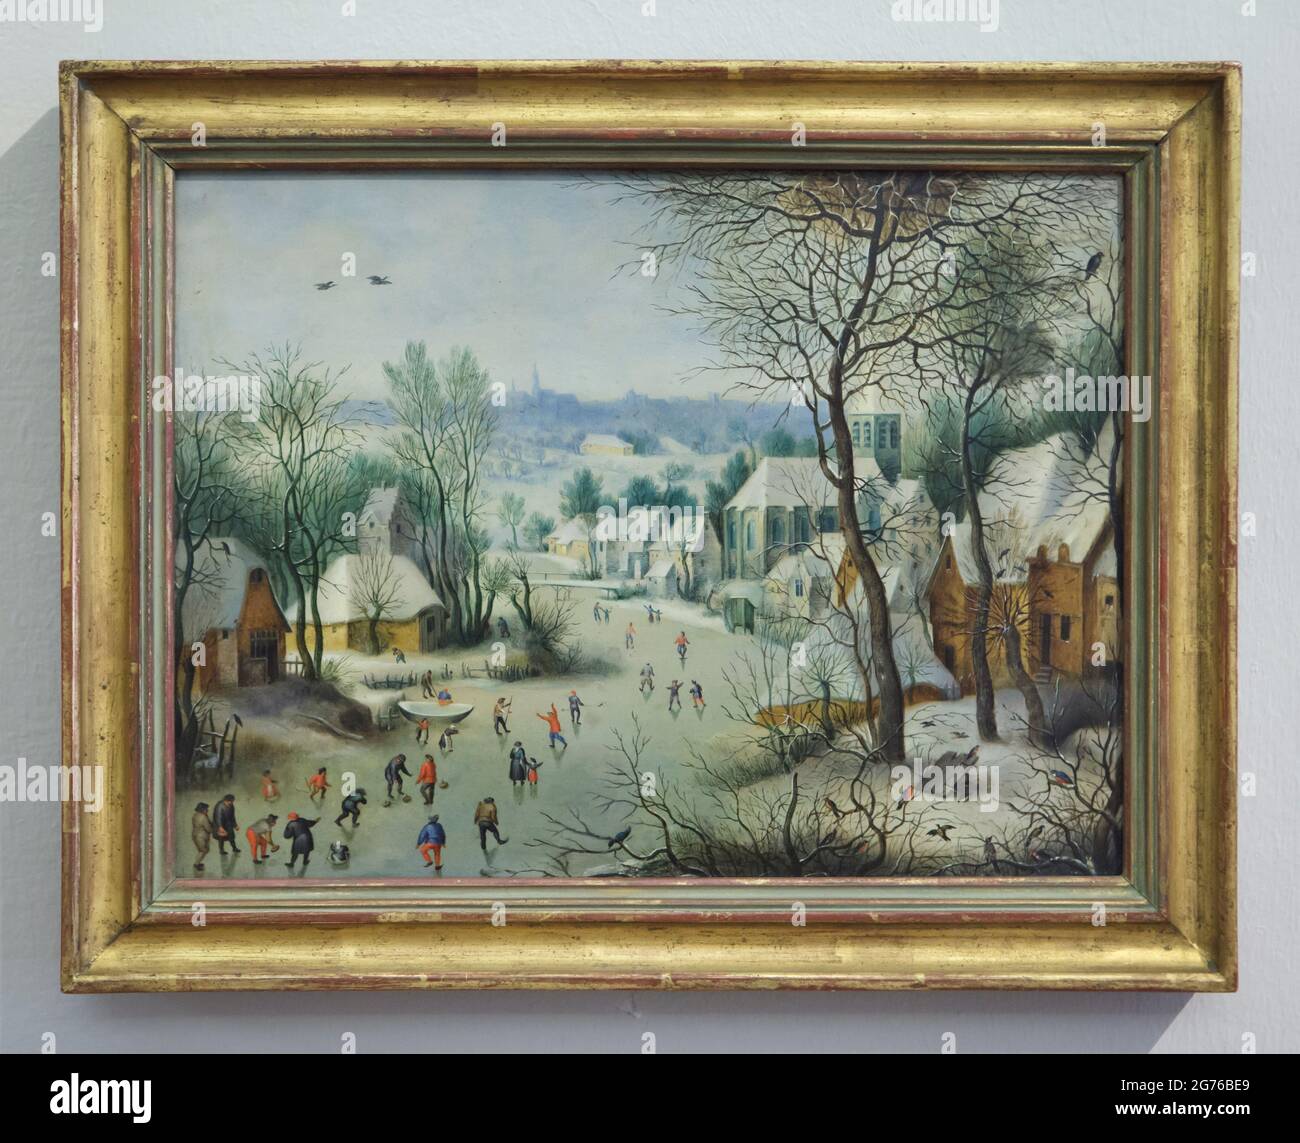 Painting 'Winter Landscape' attributed to Flemish Baroque painter Peeter Gijsels (1621-1690) on display at the permanent exhibition of old masters of the National Gallery (Národní galerie) in Sternberg Palace (Šternberský palác) in Prague, Czech Republic. The painting is a variation after the famous painting 'Winter Landscape with Ice skaters and Bird trap' by Pieter Bruegel the Elder (1565). Stock Photo